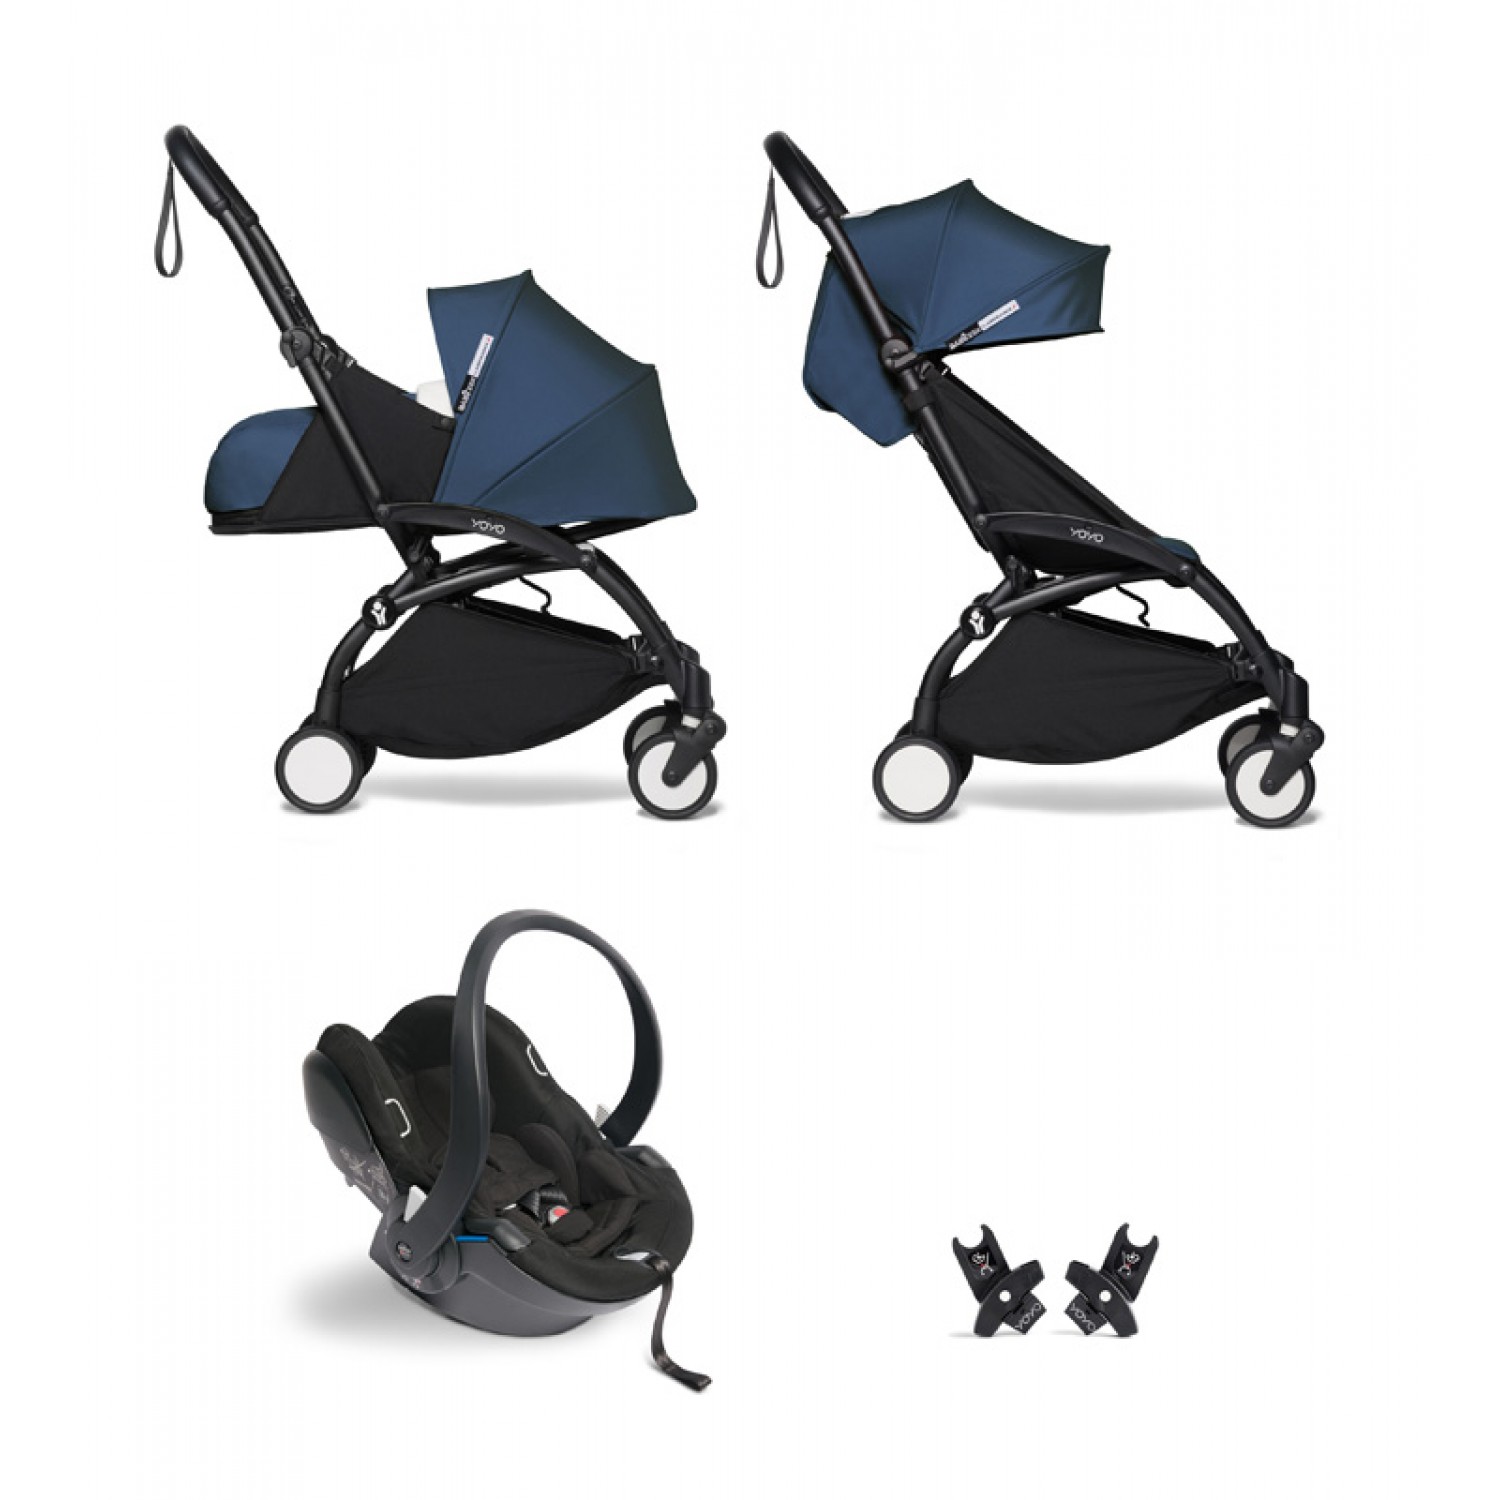 All-in-one BABYZEN stroller YOYO2 0+, car seat and 6+ |  Black Chassis Air France